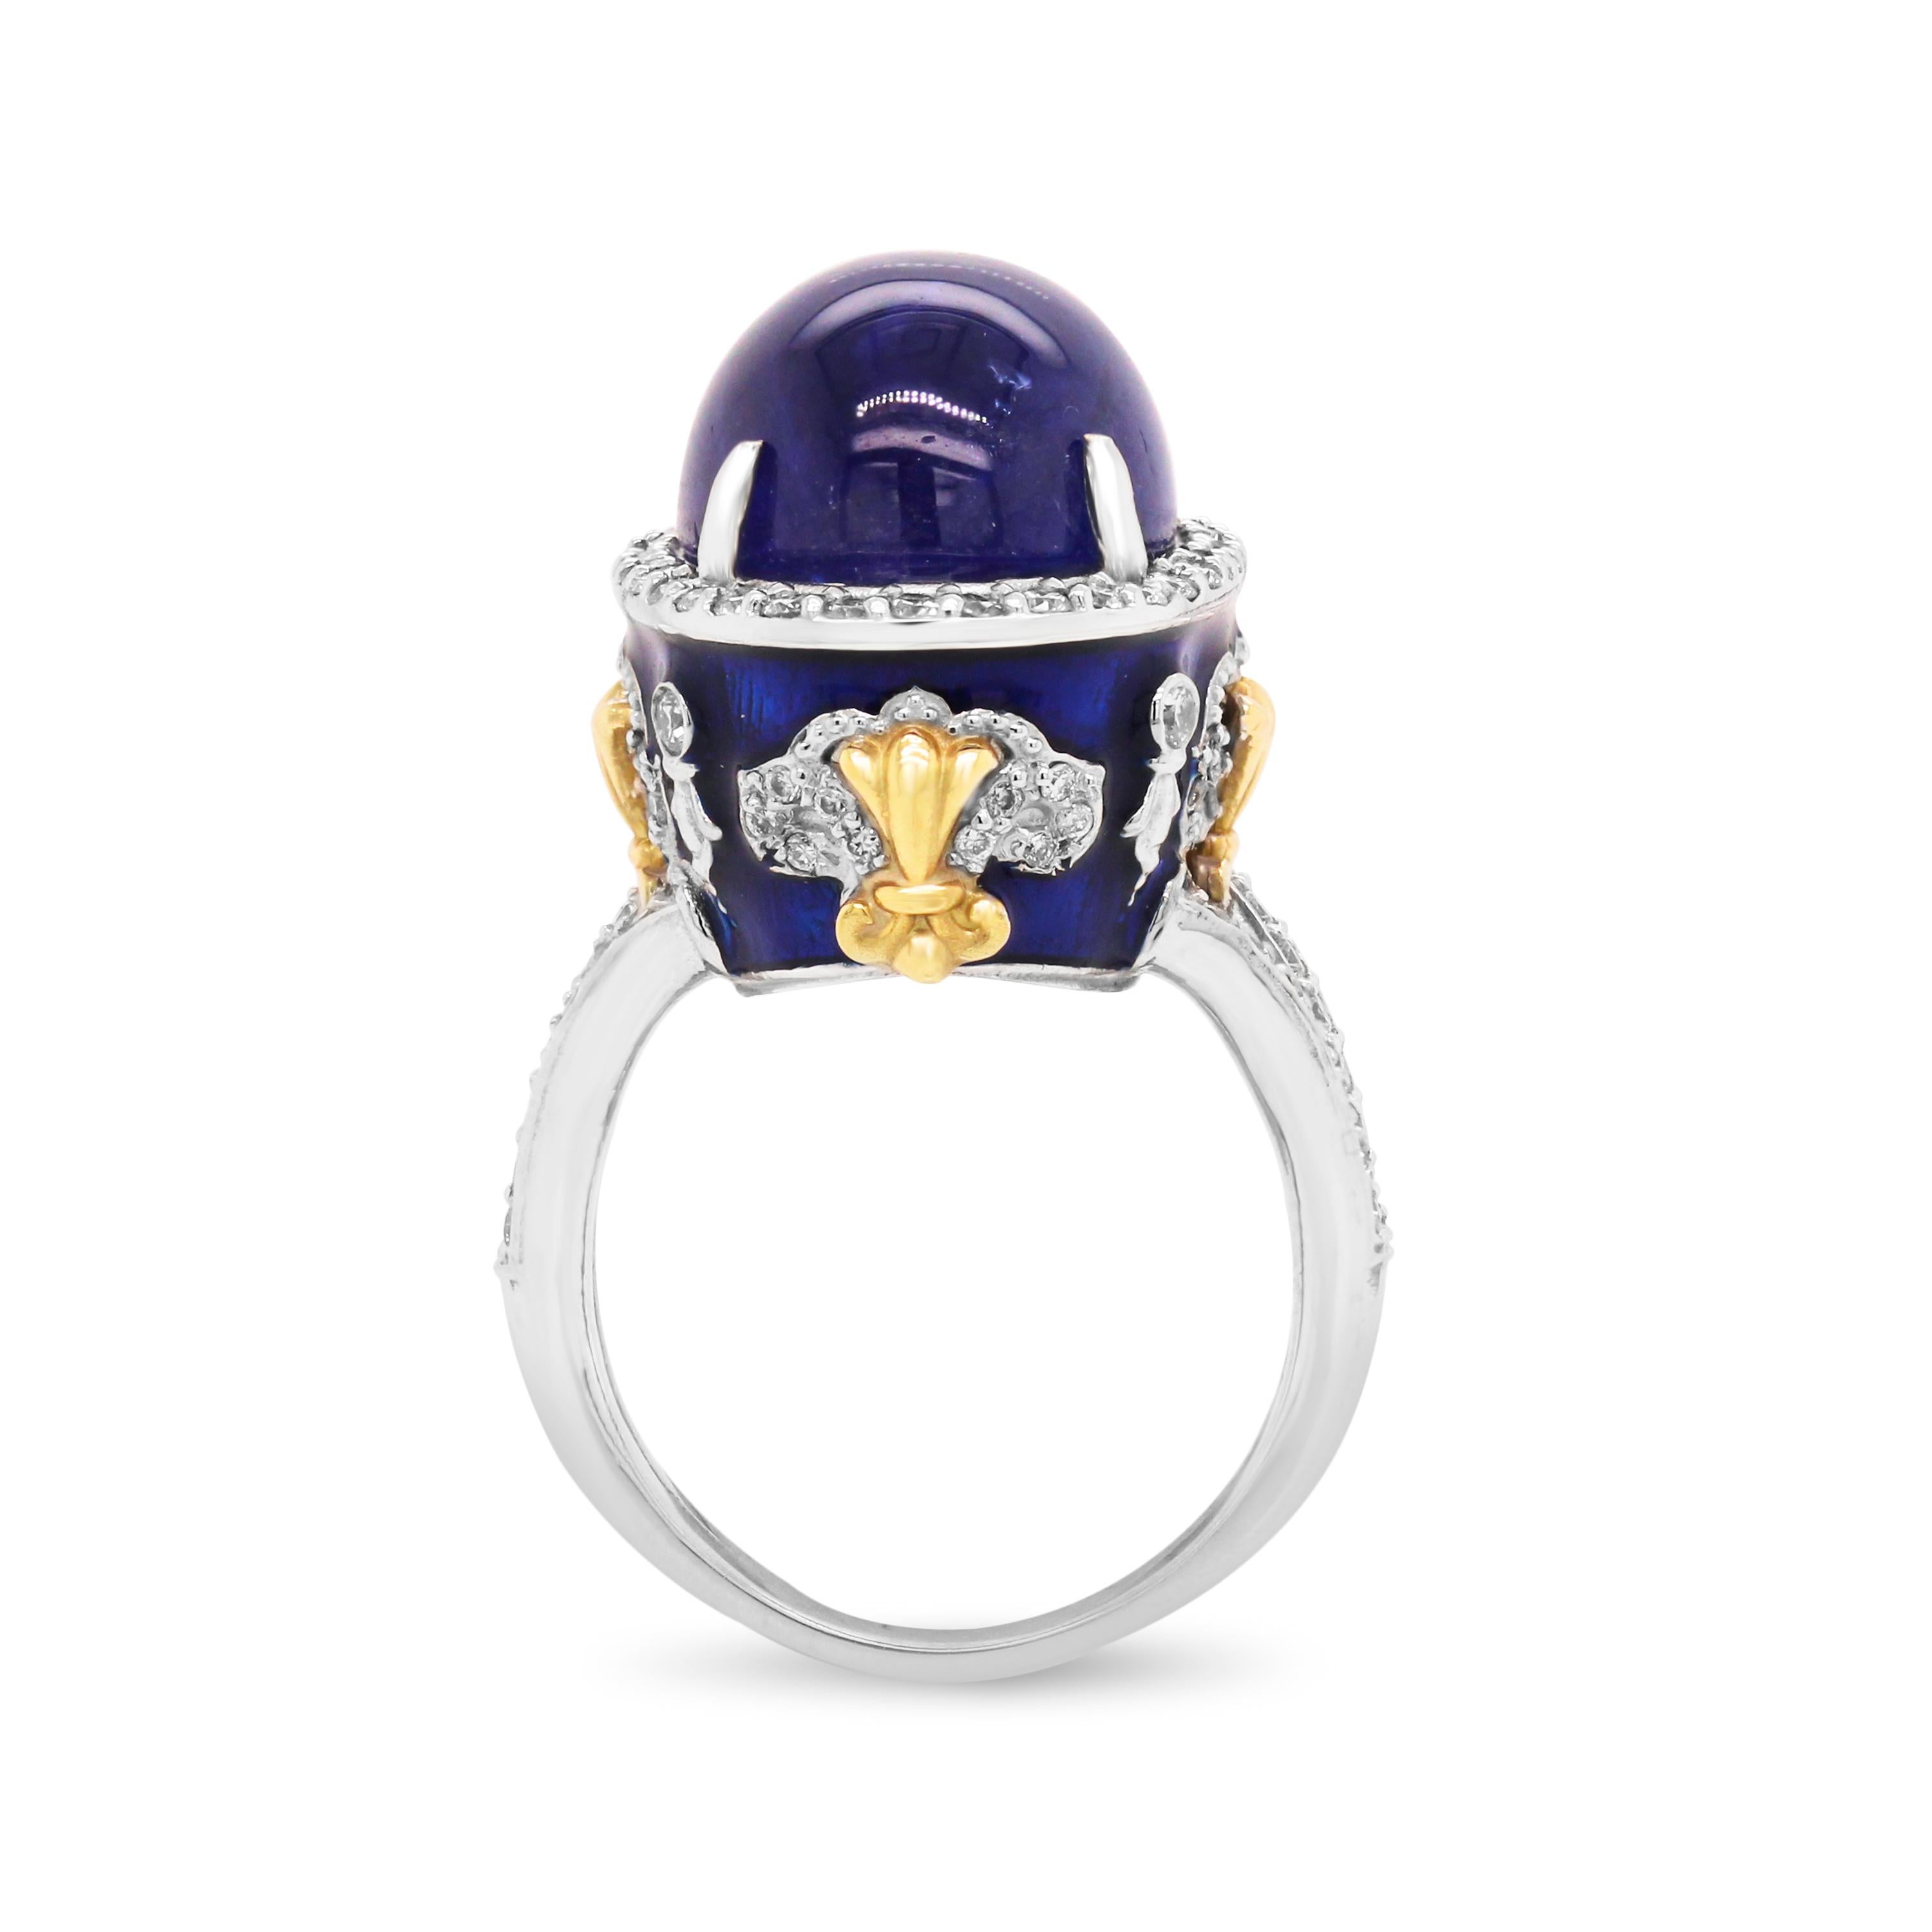 Stambolian Cabochon Tanzanite Cobalt Blue Enamel Diamond 18K Gold Cocktail Ring  

NO RESERVE PRICE 

From the 